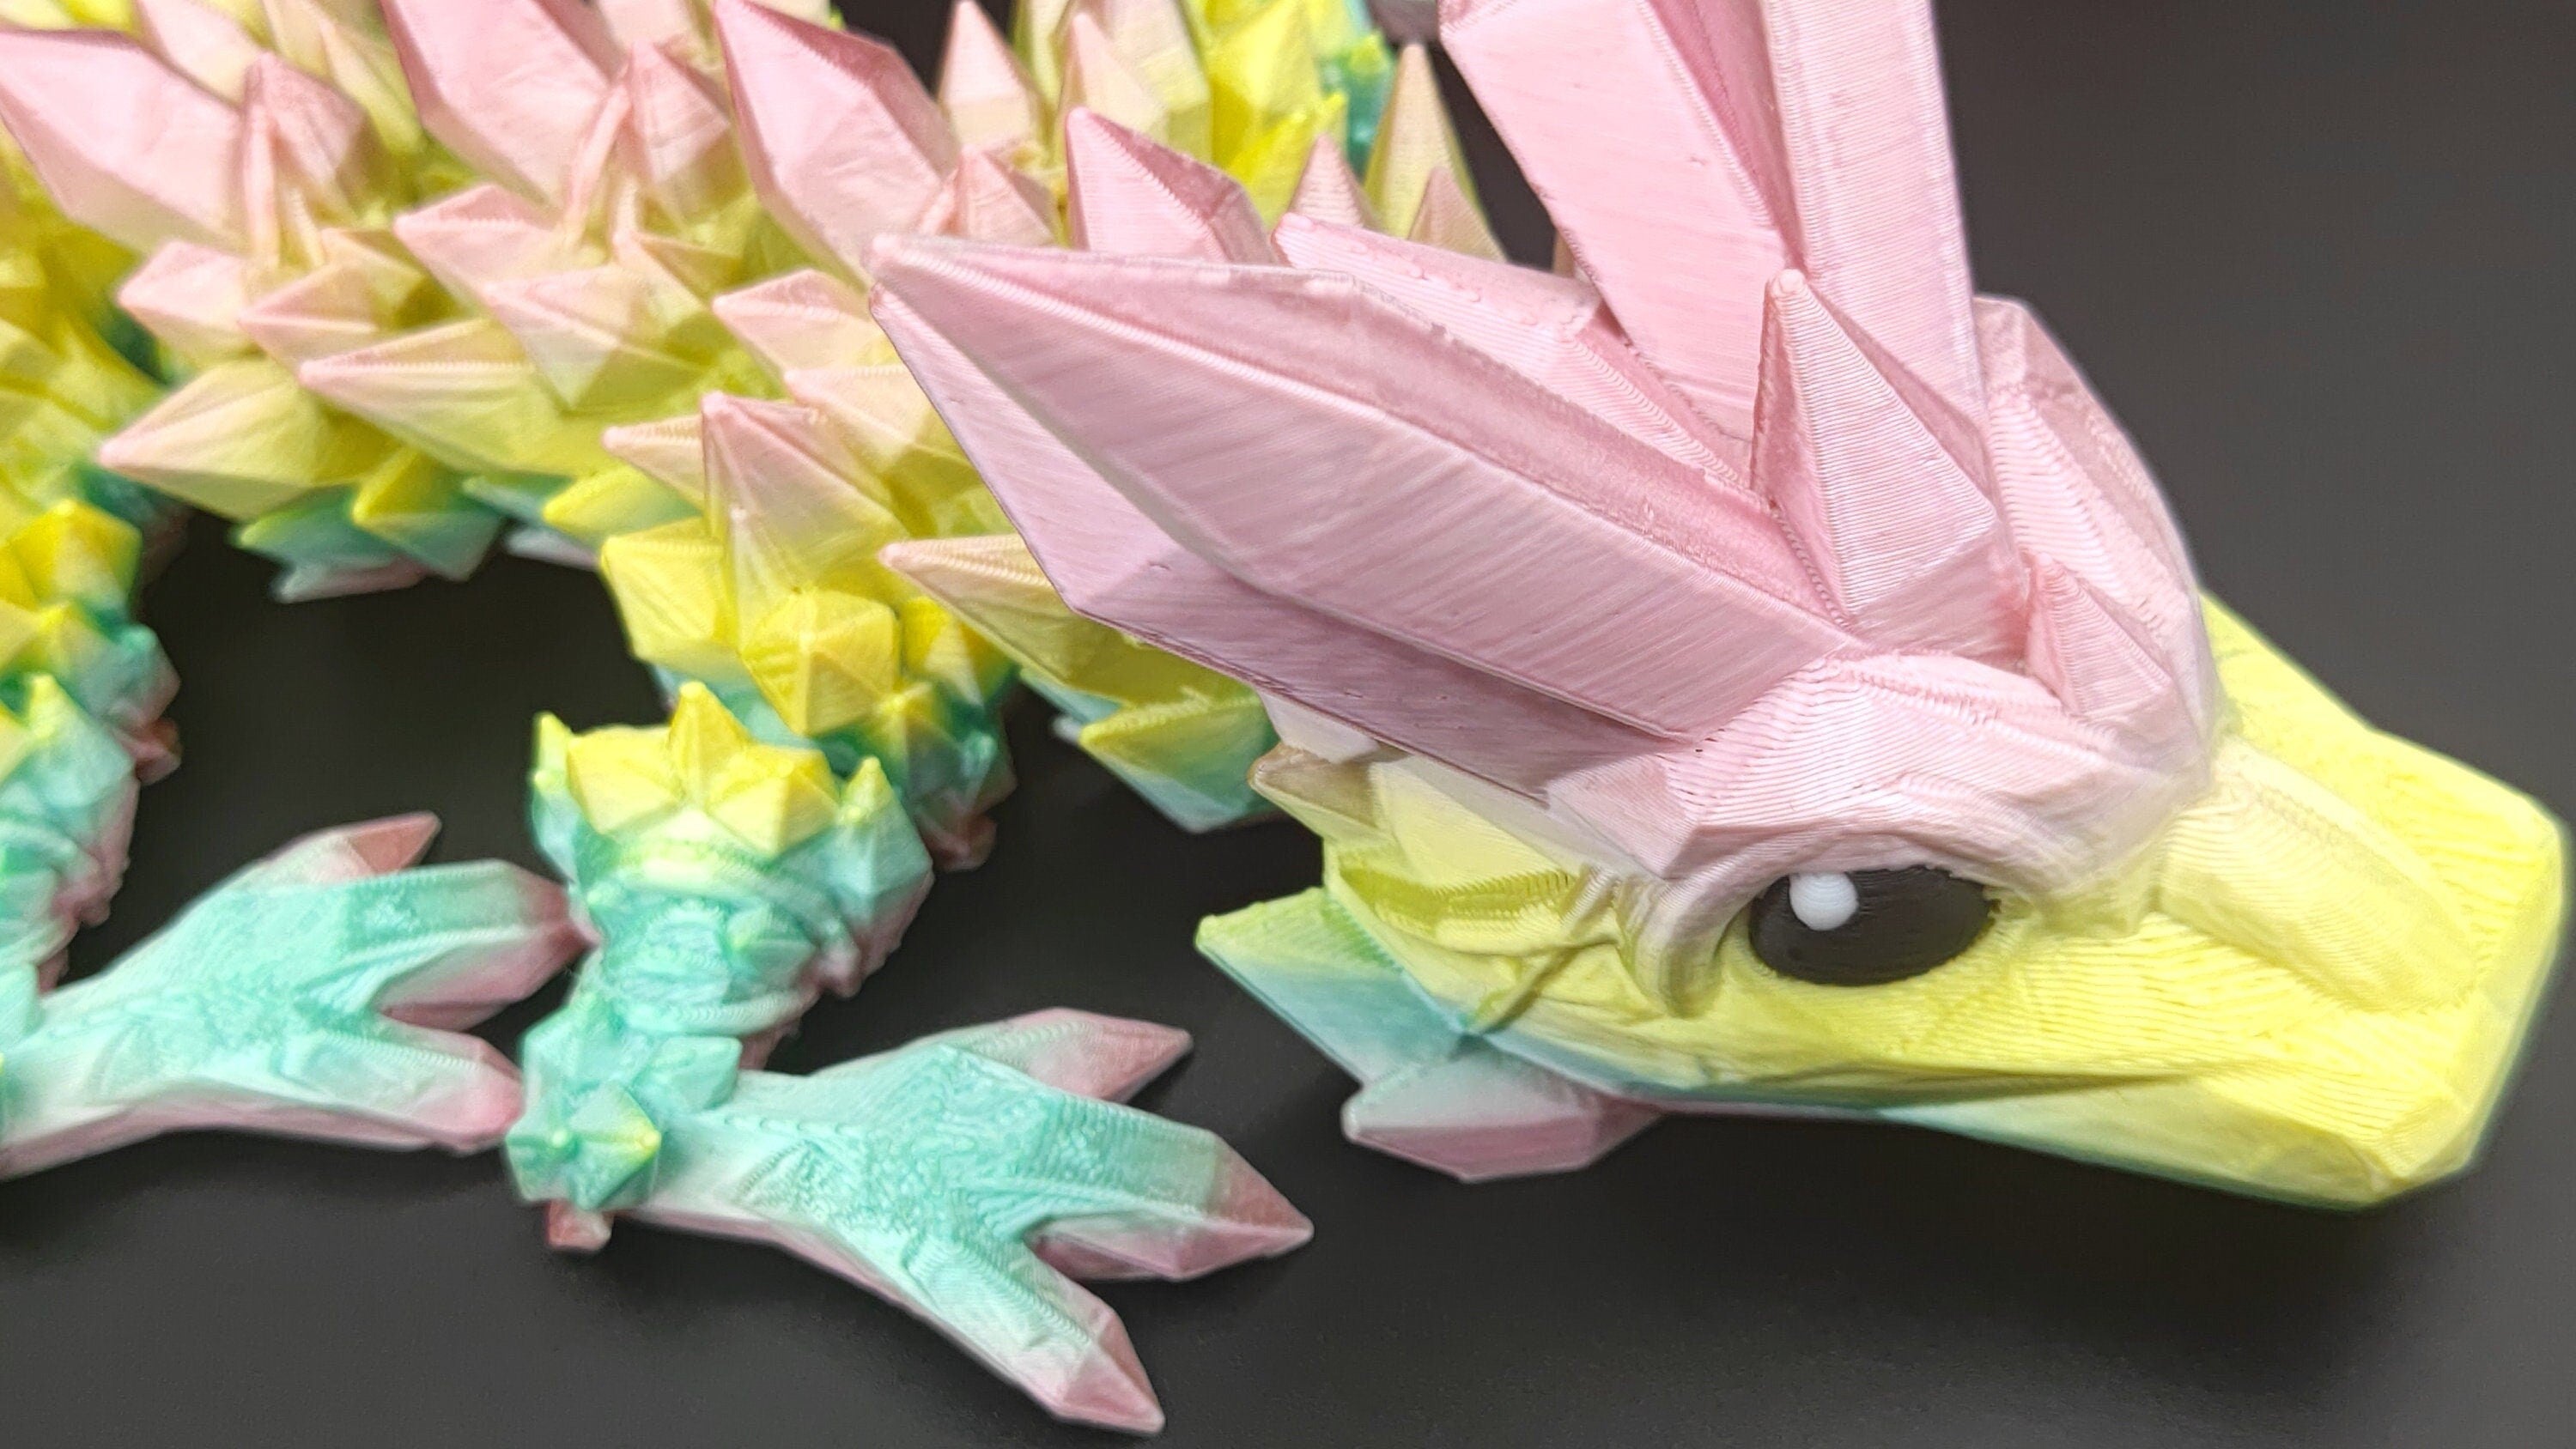 Crystal Baby Dragon | 3D Printed Crystal Dragon | 11.5 inches | Dragon friend | Adopt this dragon today (made) | Fidget Toy | Flexi Dragon.